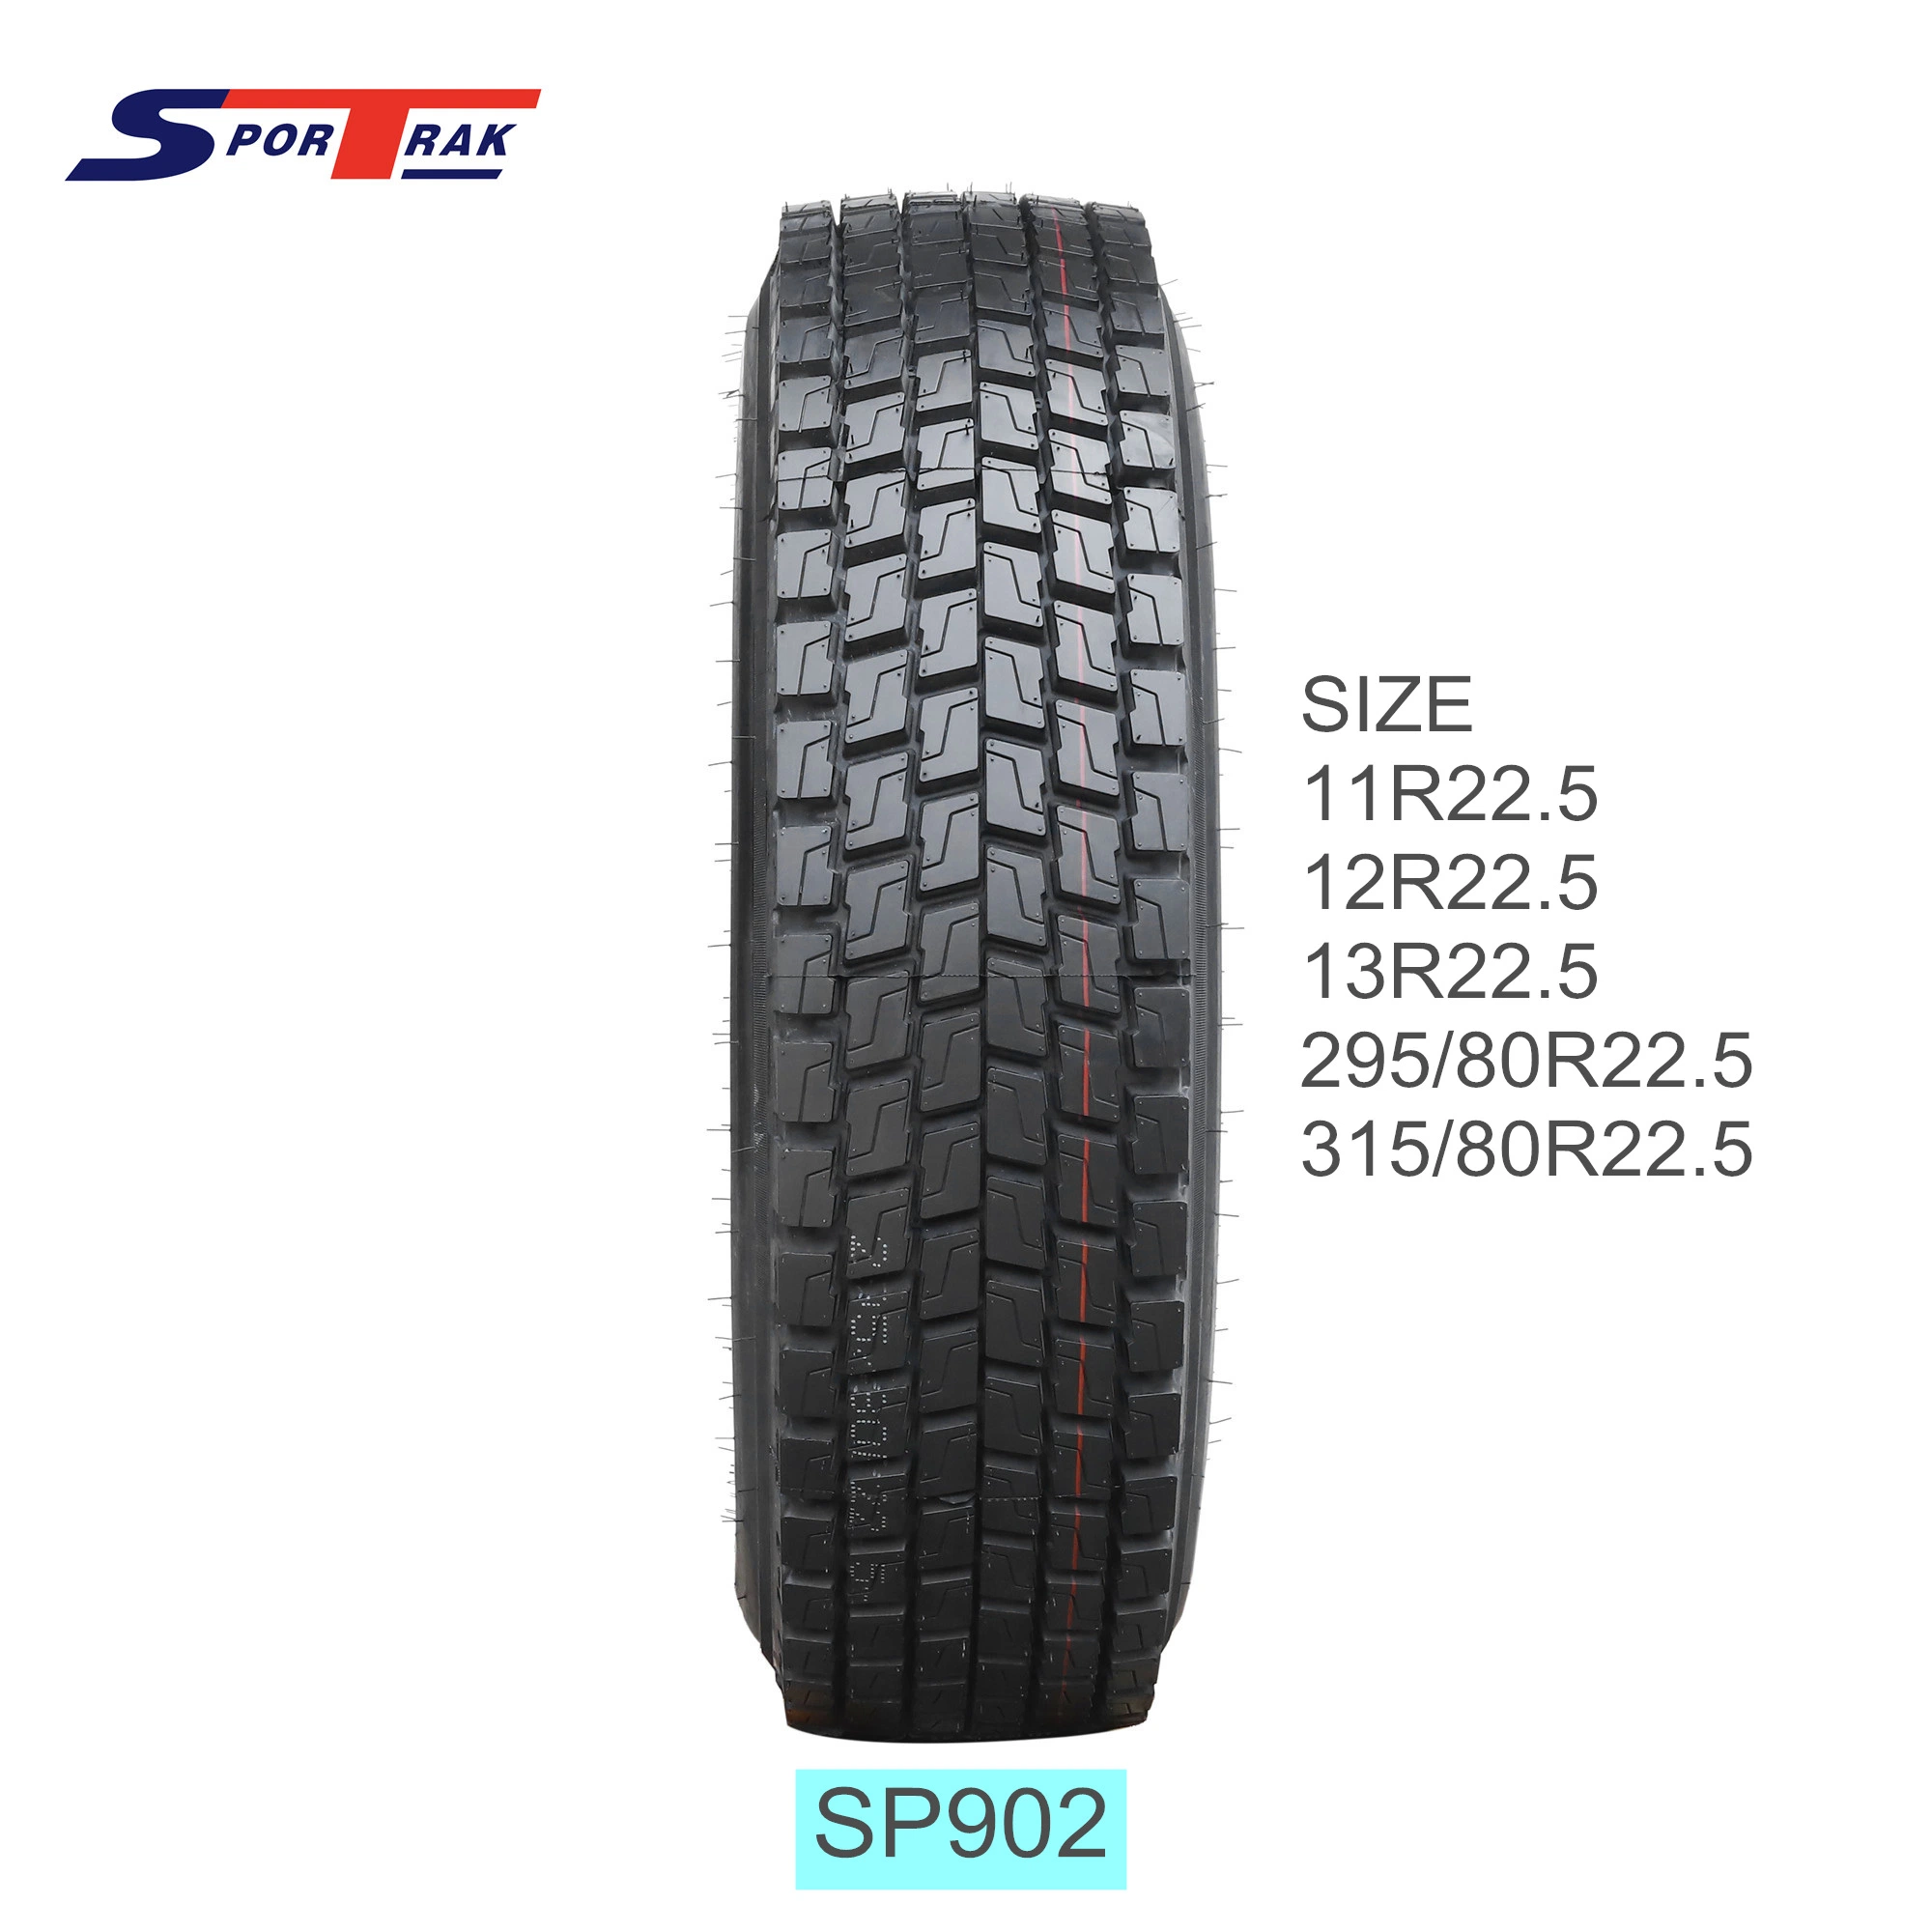 Top Tire Brands Radial TBR 13r22.5 Heavy Duty Tubeless Truck Tires 11r22.5 12r22.5 China Manufacture 315/80r22.5 385/65r22.5 Truck Tire Wheel and Accessories